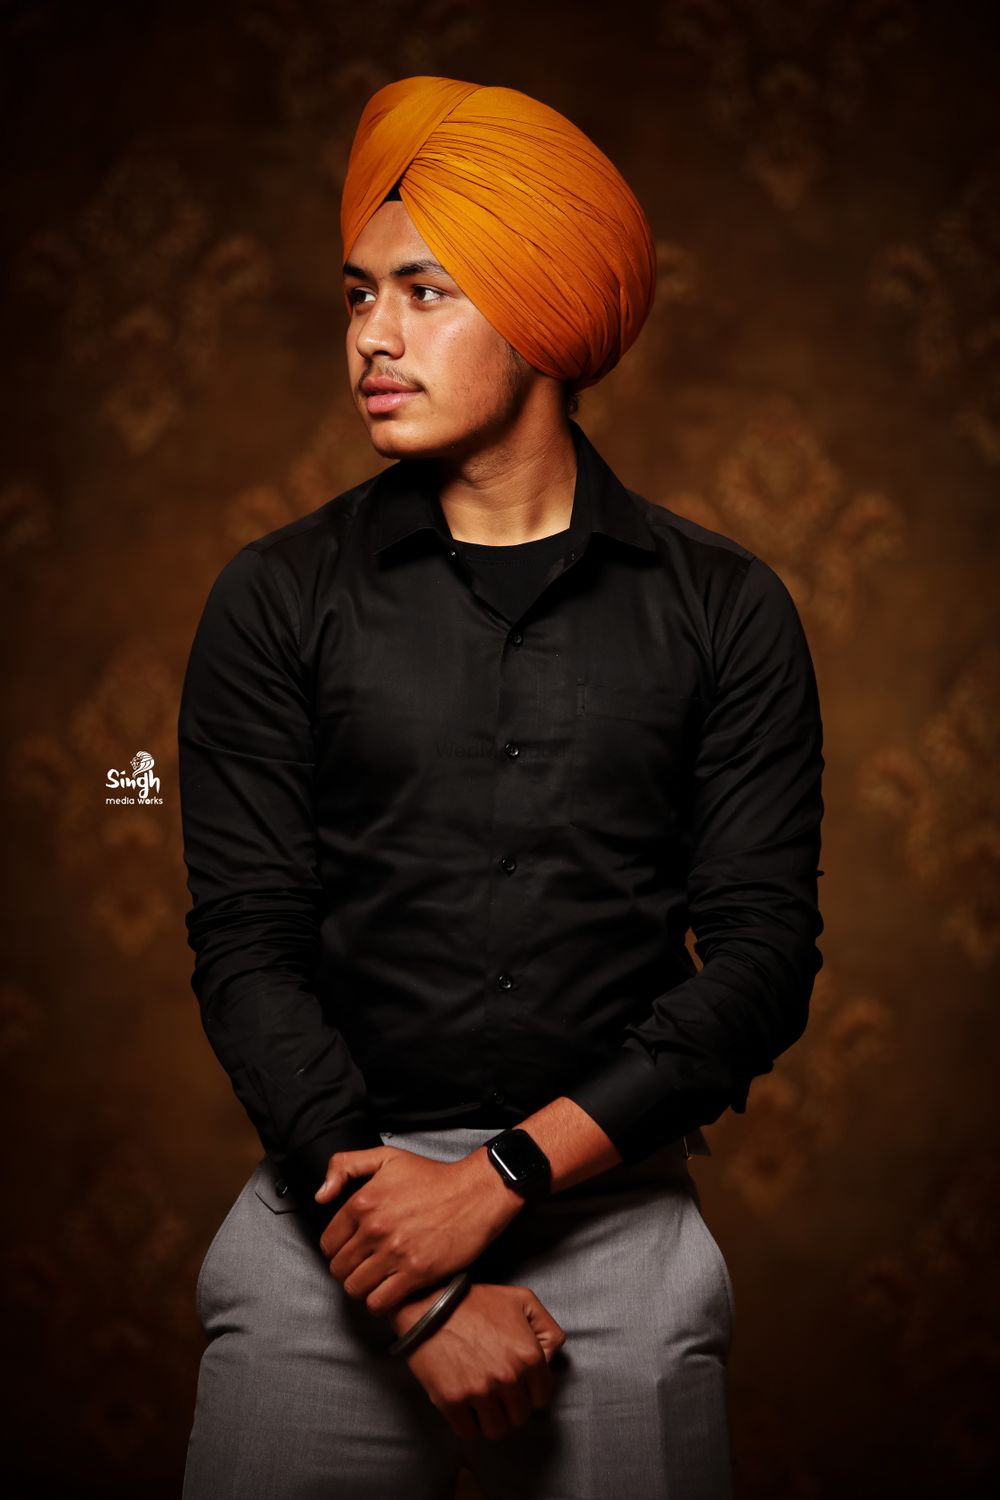 Photo From New Album - By Singh Media Works